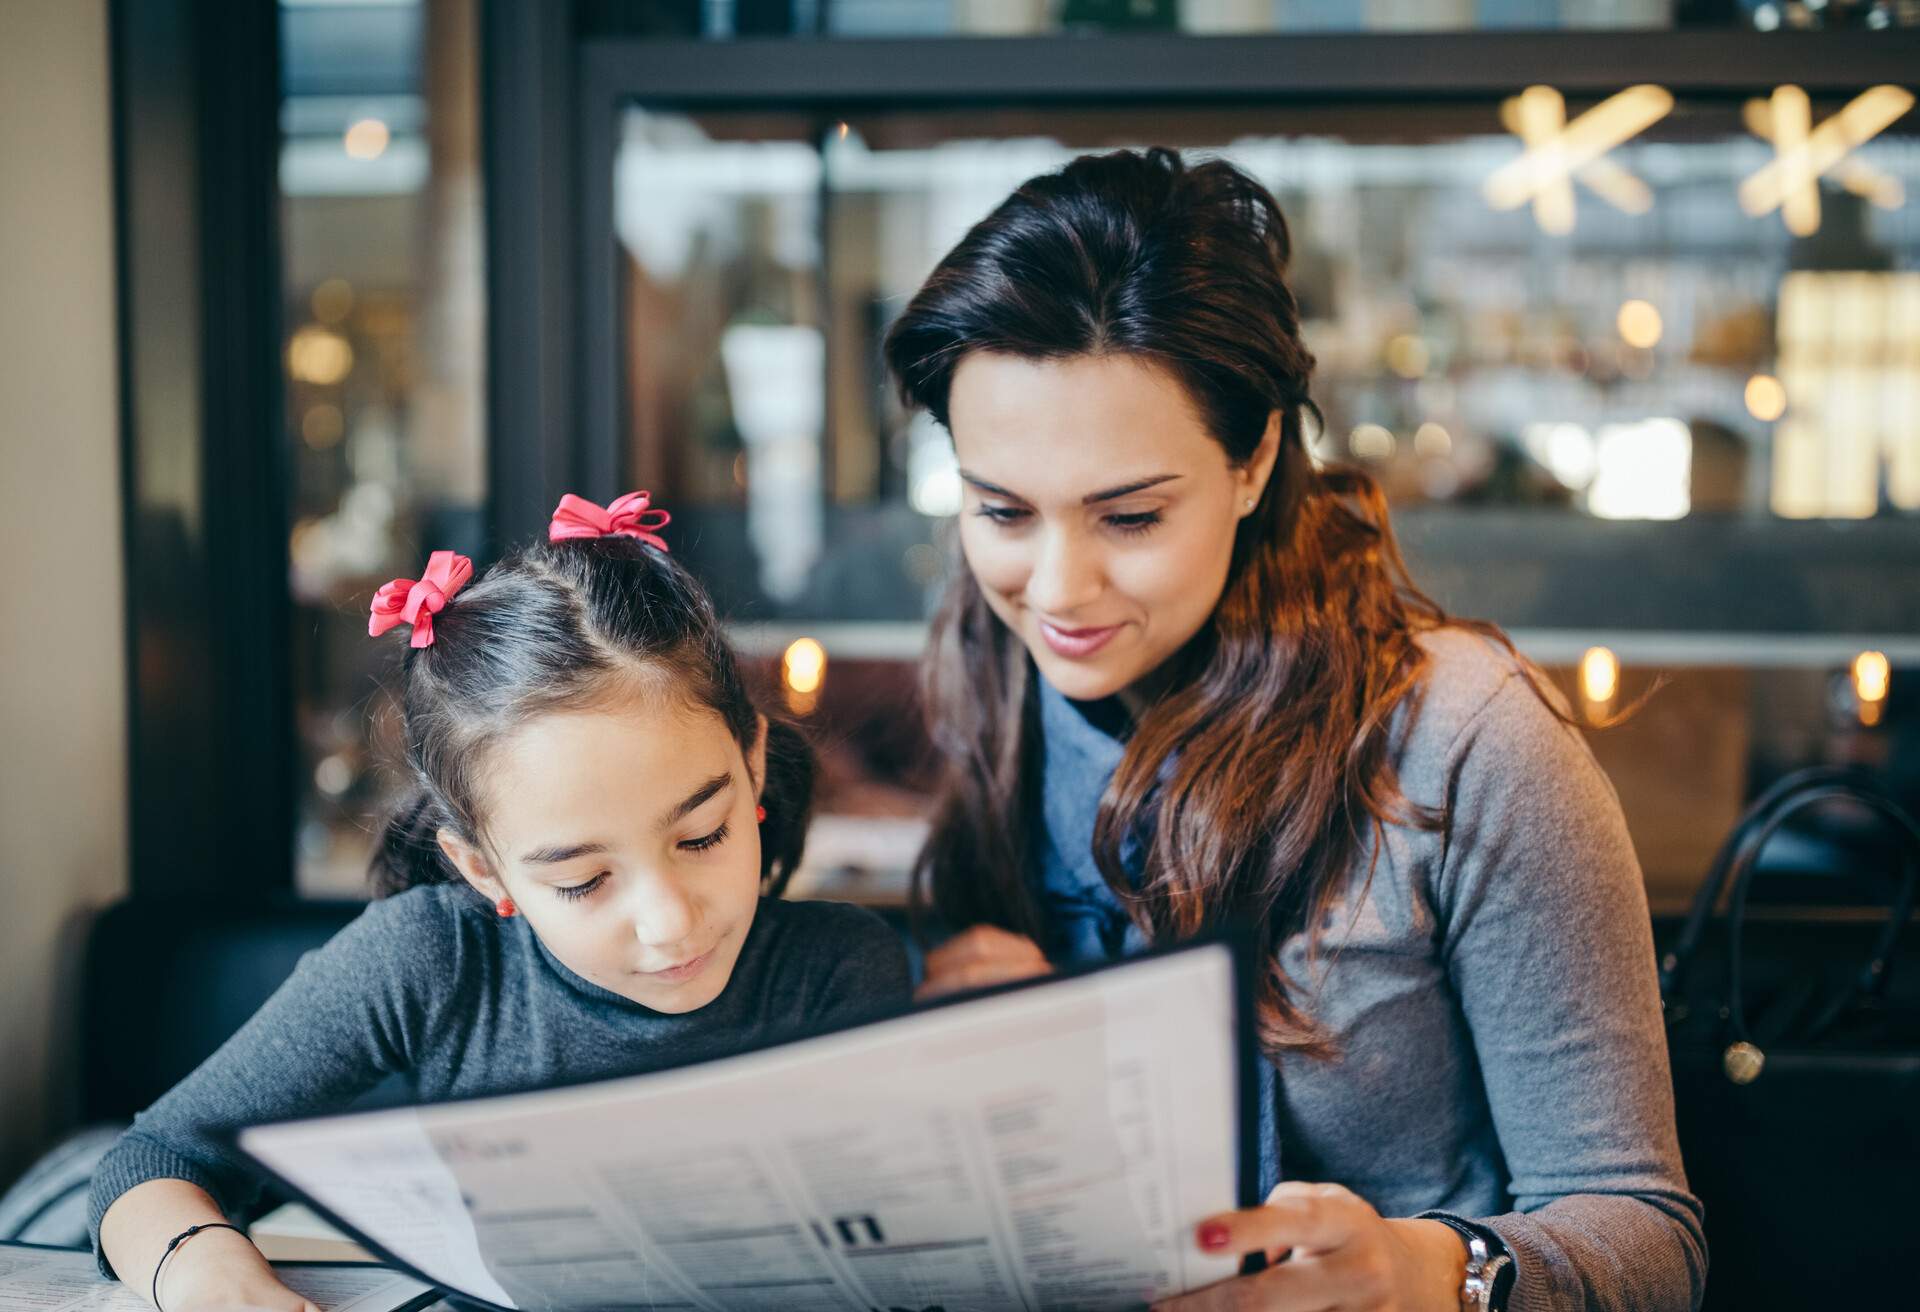 Mother and daughter reading the menu in restaurant